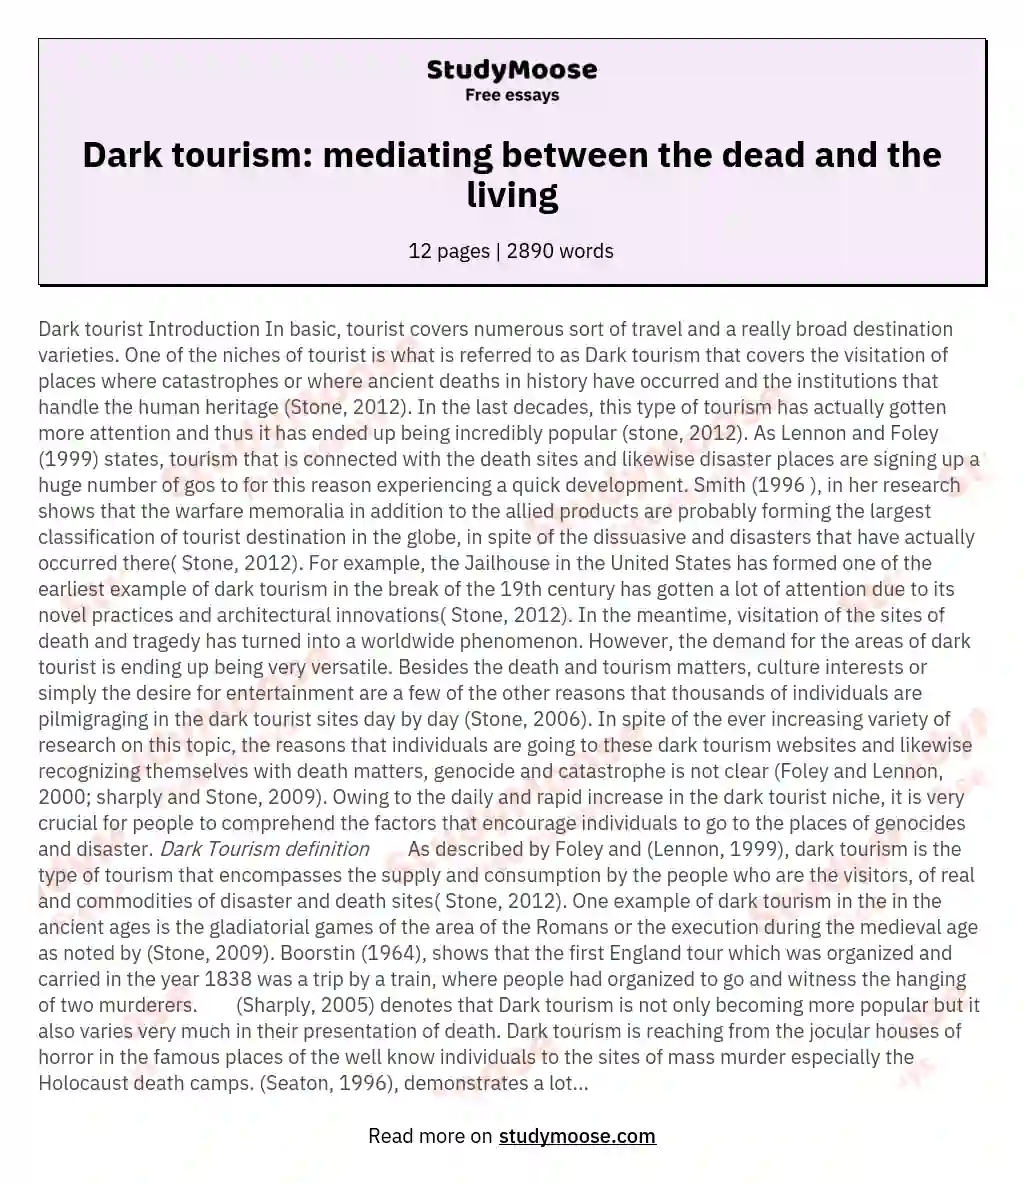 Dark tourism: mediating between the dead and the living essay